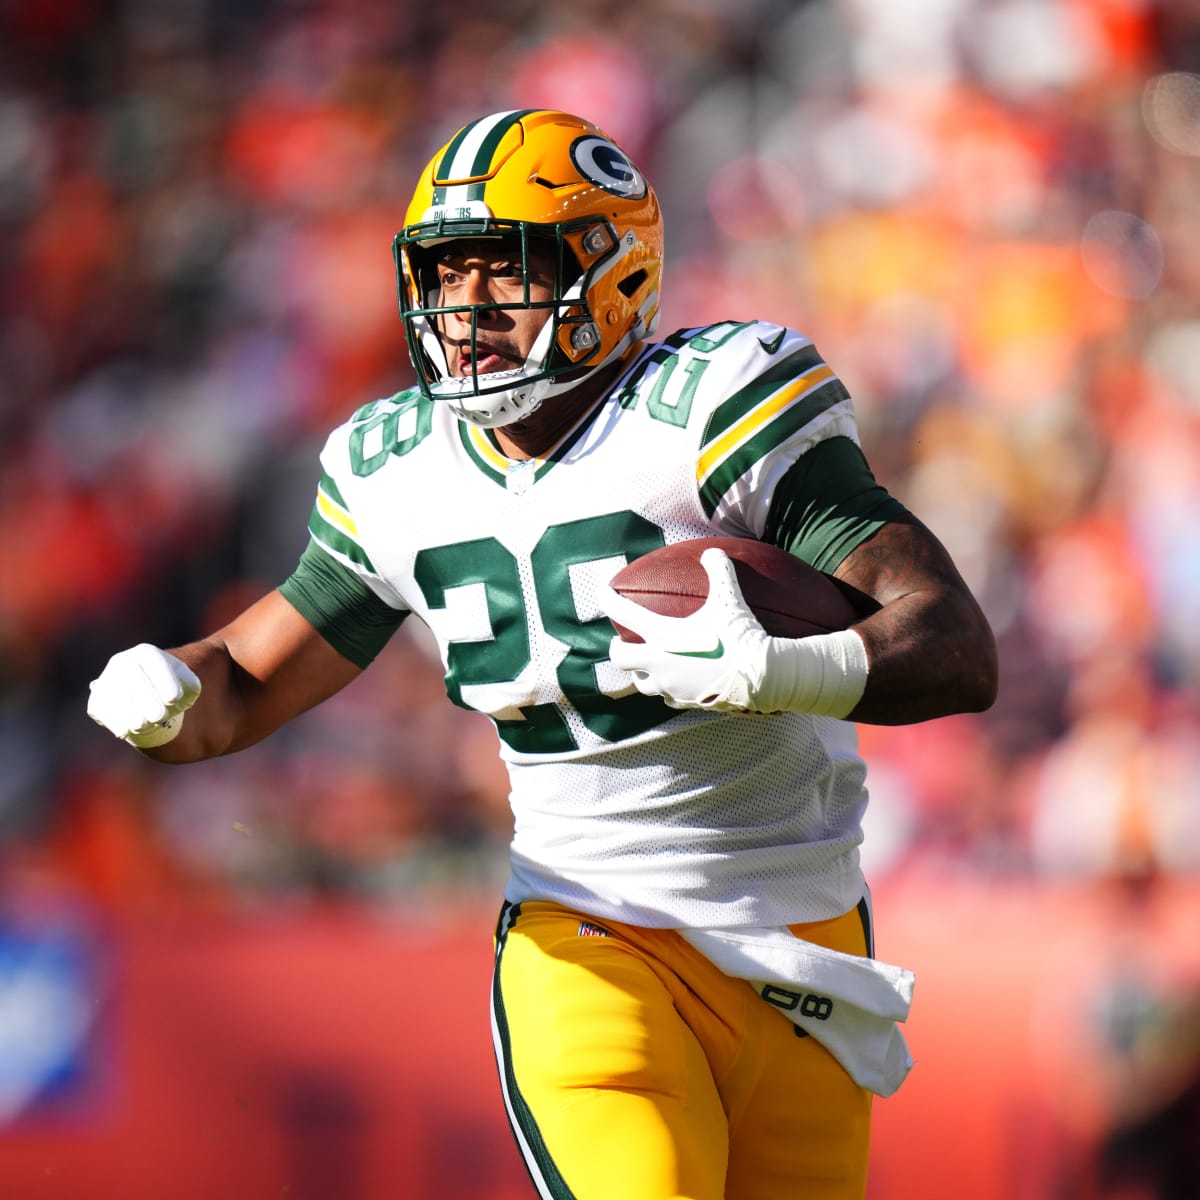 Packers place TE Musgrave, RB Wilson on IR. They sign RB Robinson